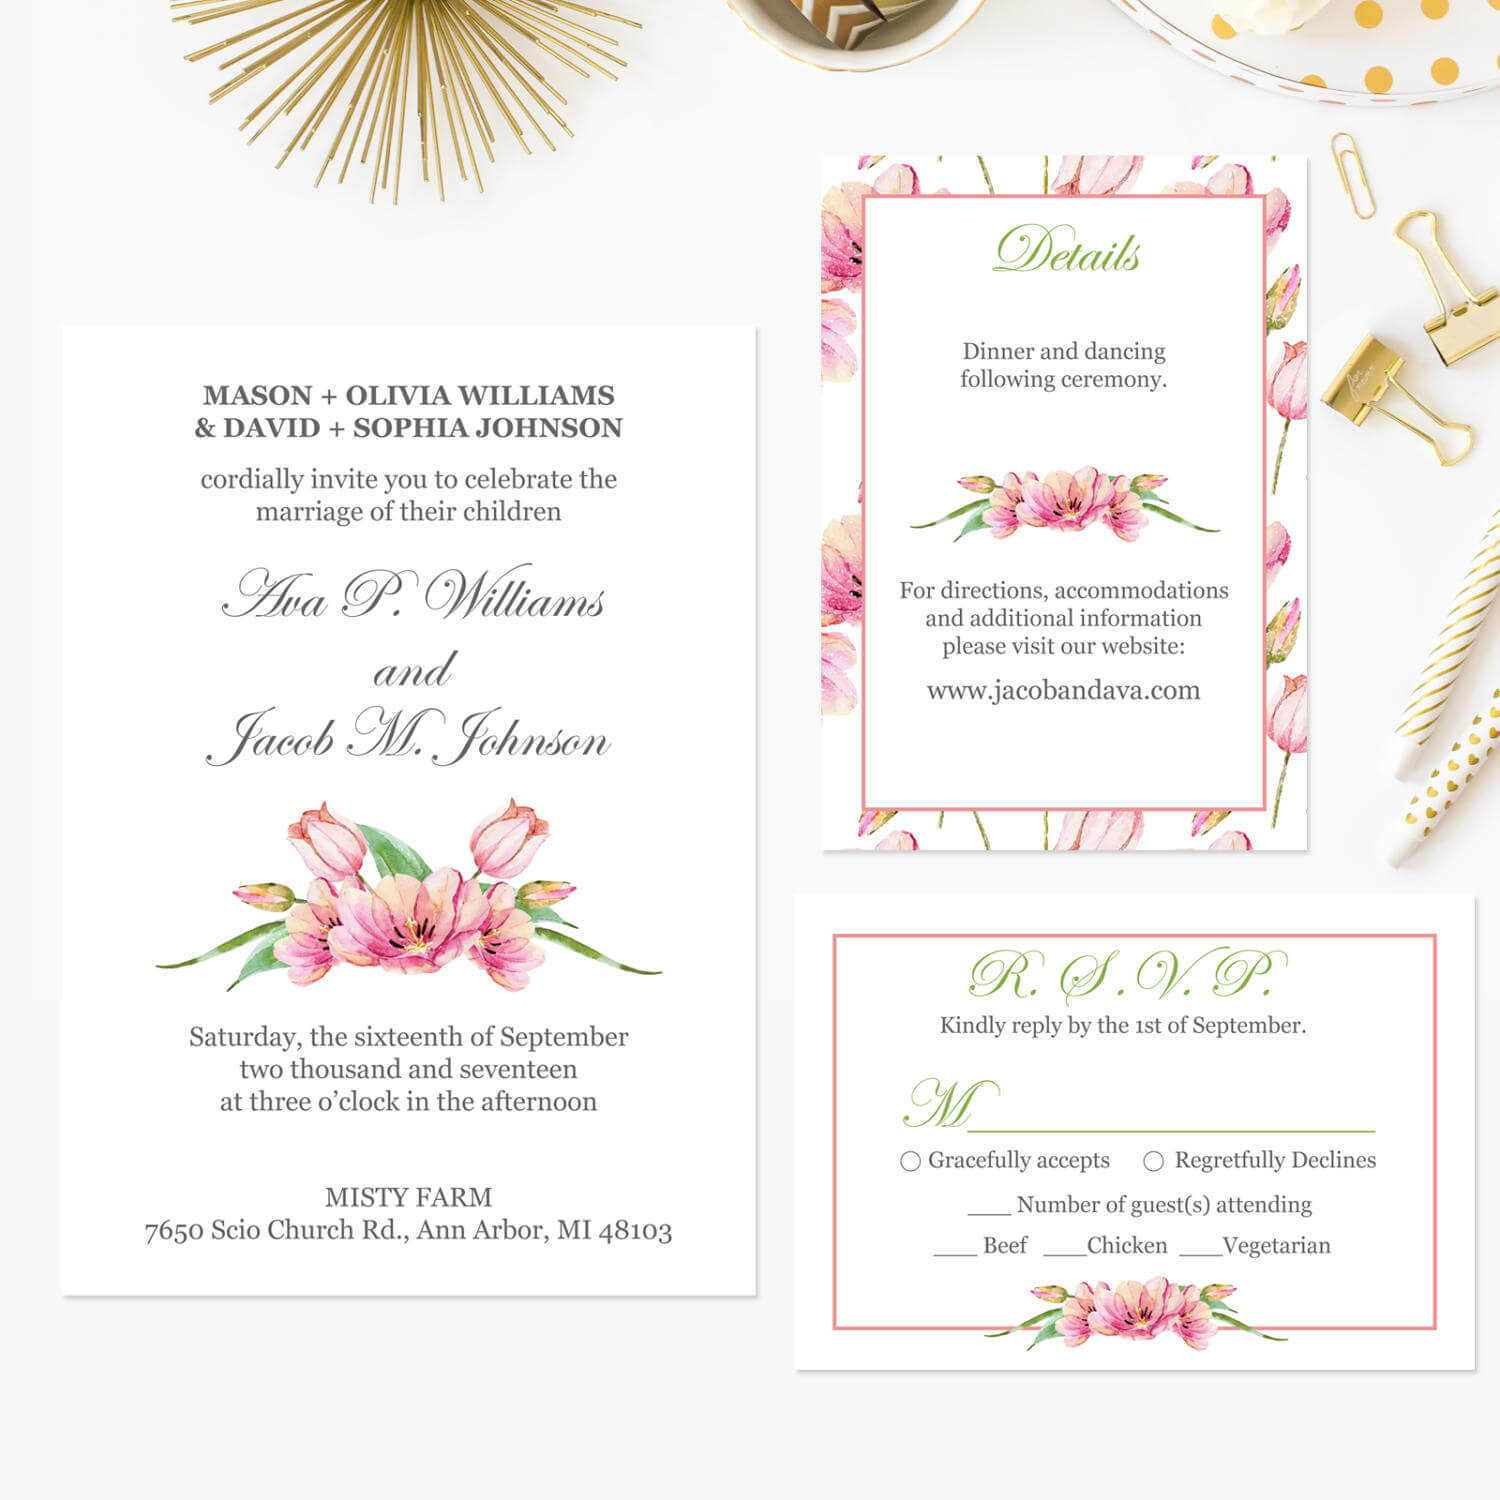 Diy Wedding Invitation Template, Printable Wedding Invitations With Rsvp  And Details Card, Instant Download Pdf Template #fpk 06S For Church Wedding Invitation Card Template